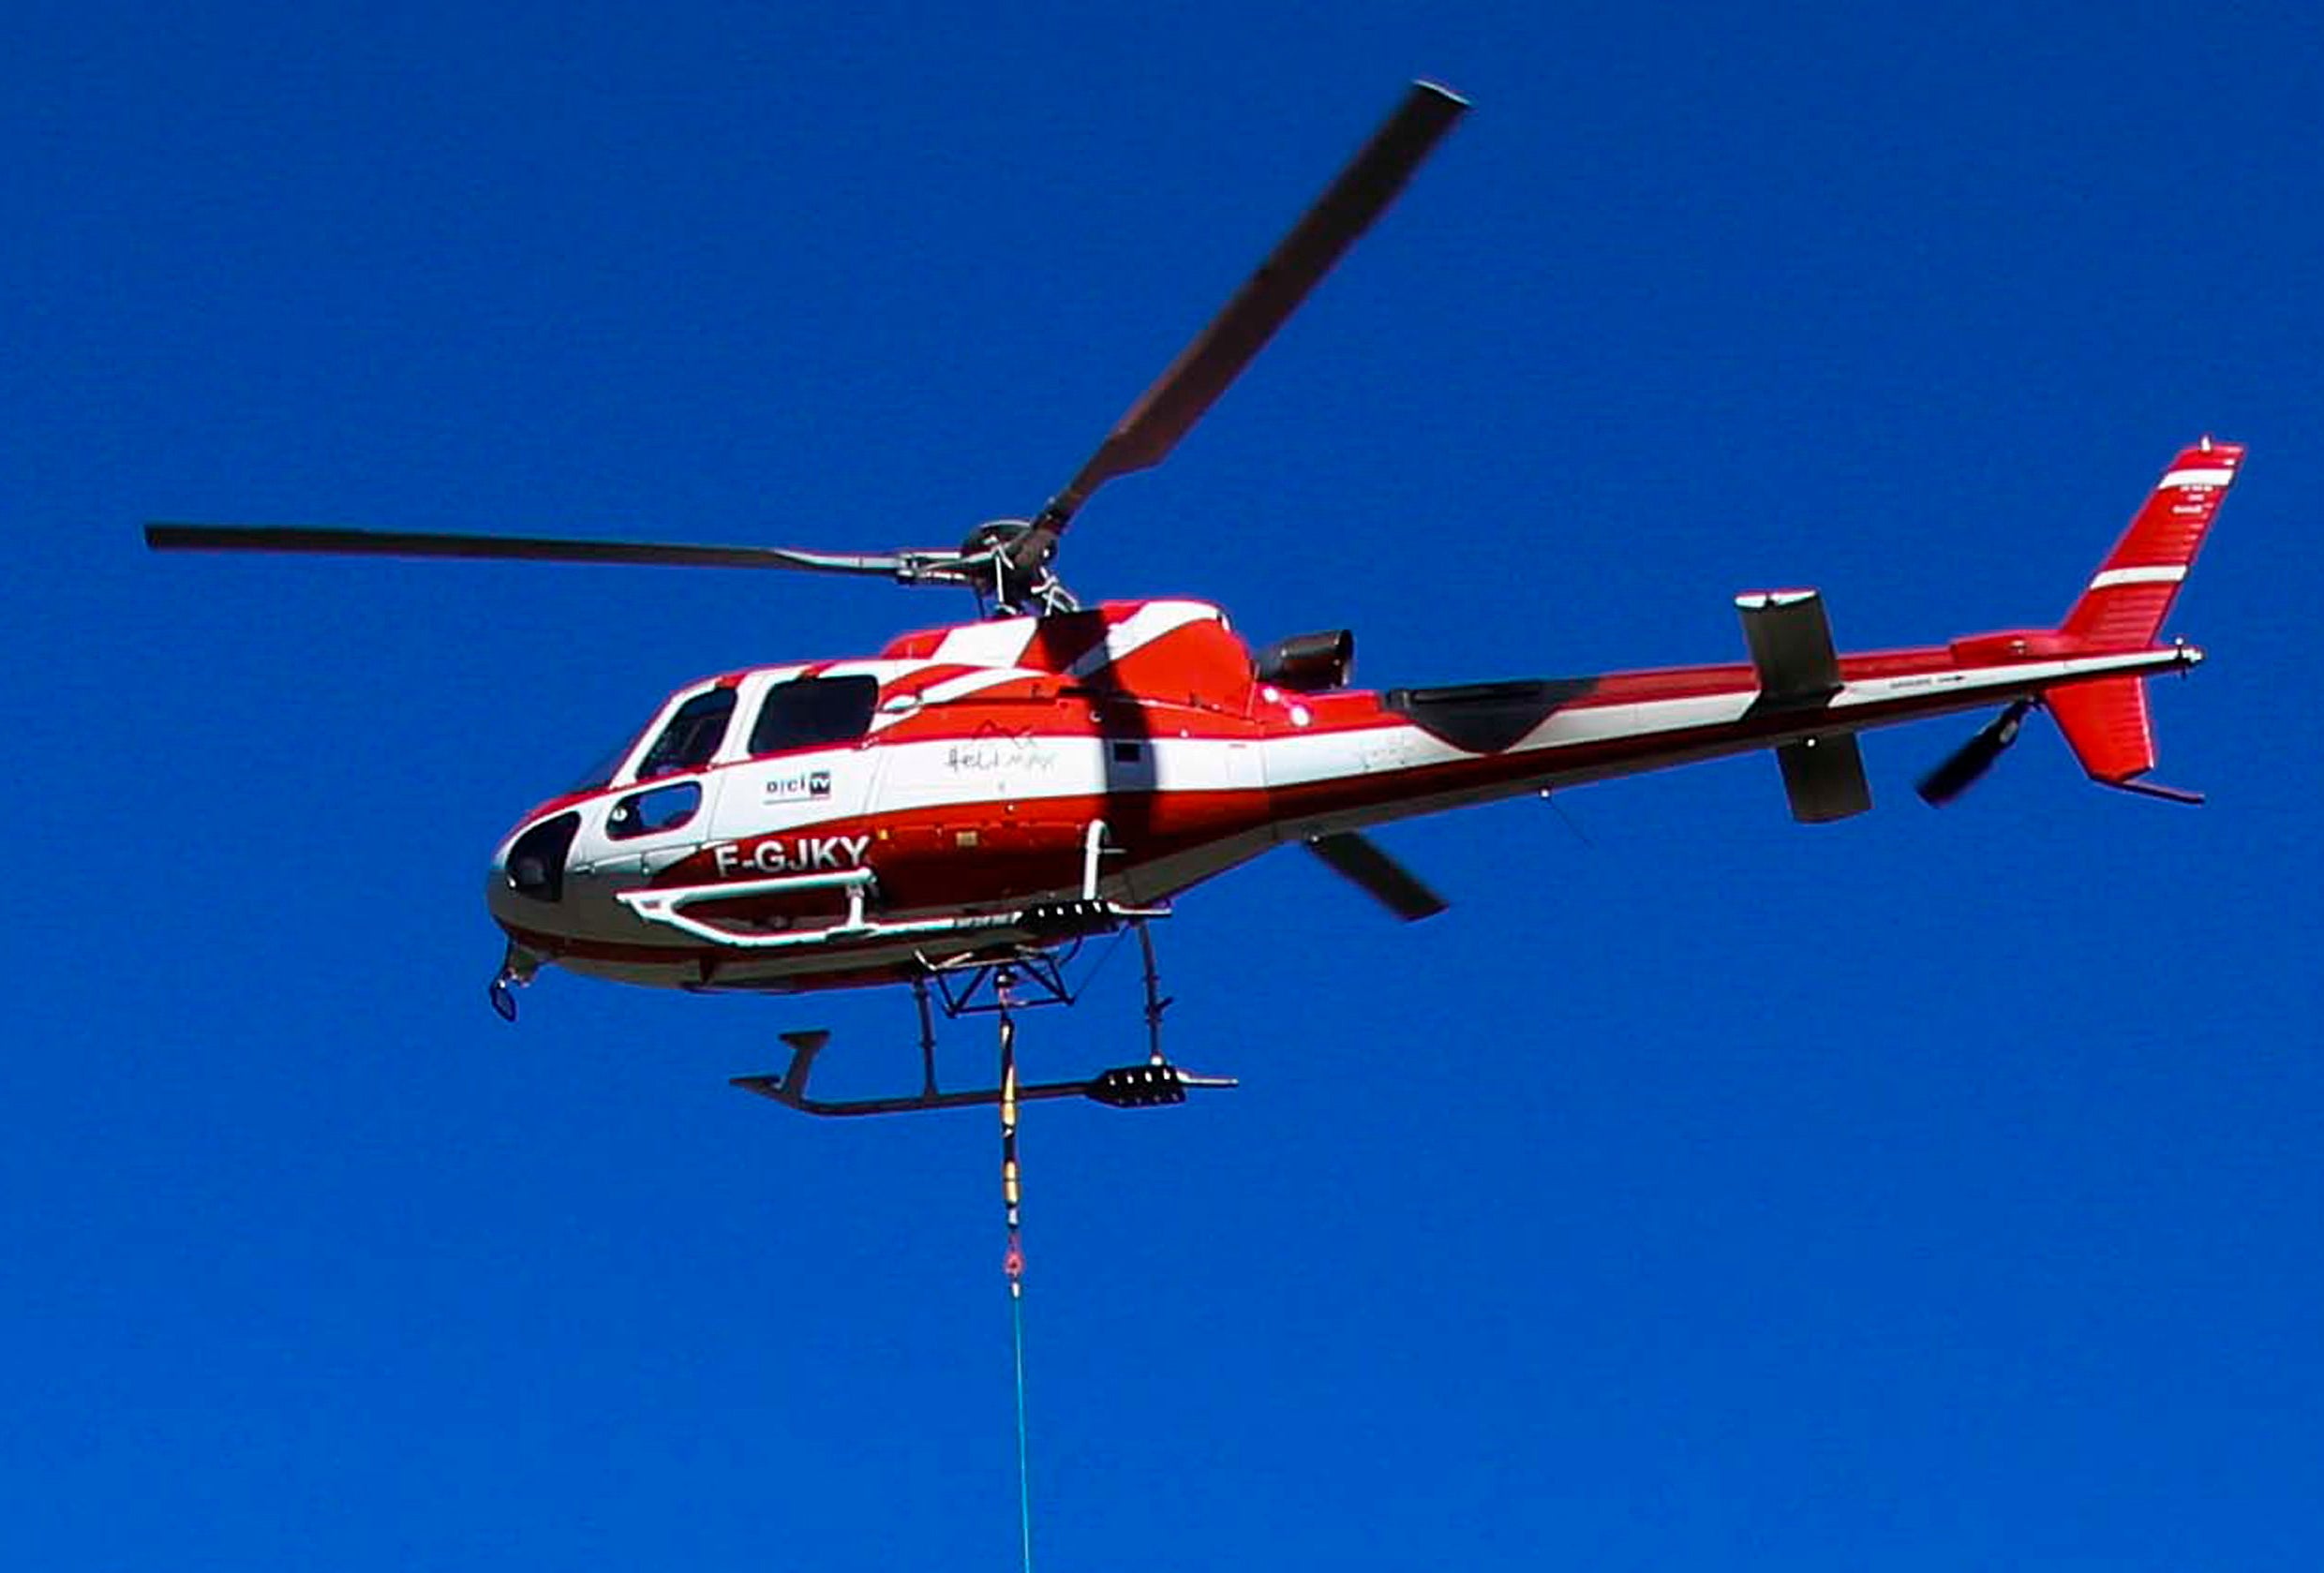 A SAF helicopter of the same model as the one pictured is reported to have crashed in Bonvillard in the French Alps.